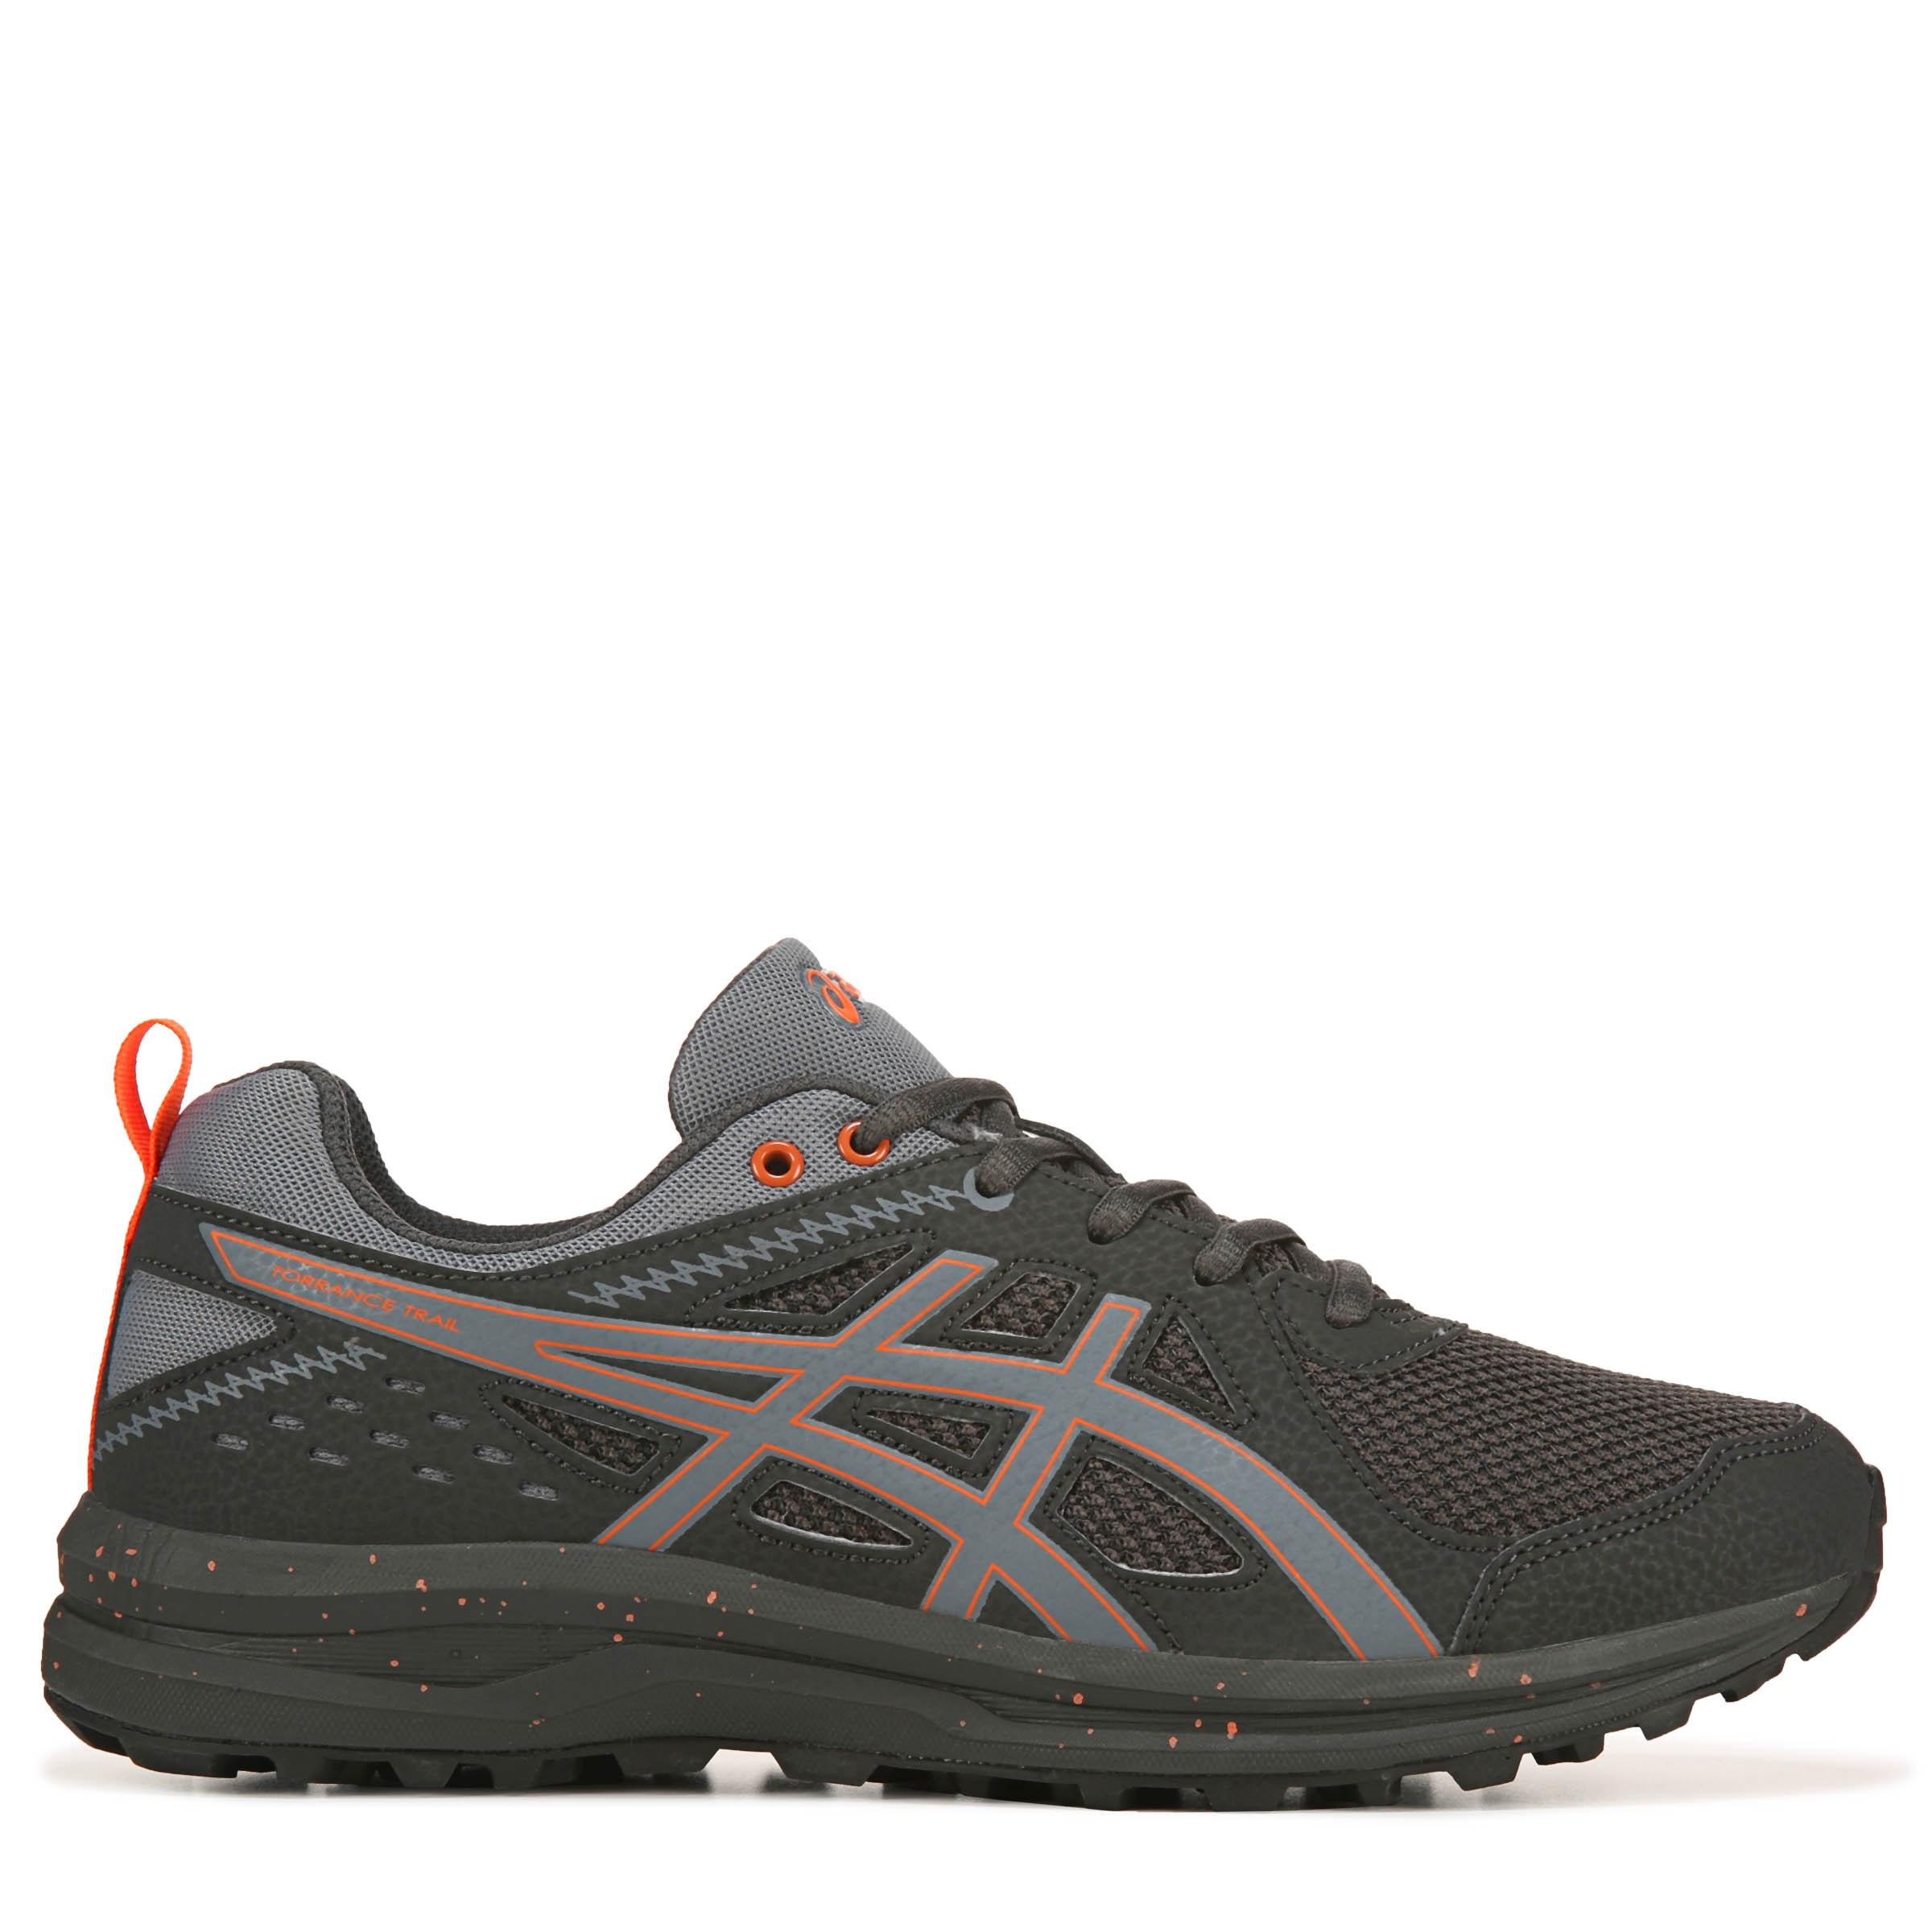 Asics Gel Torrance Wide Trail Running Shoes in Grey/Orange (Gray) for ...